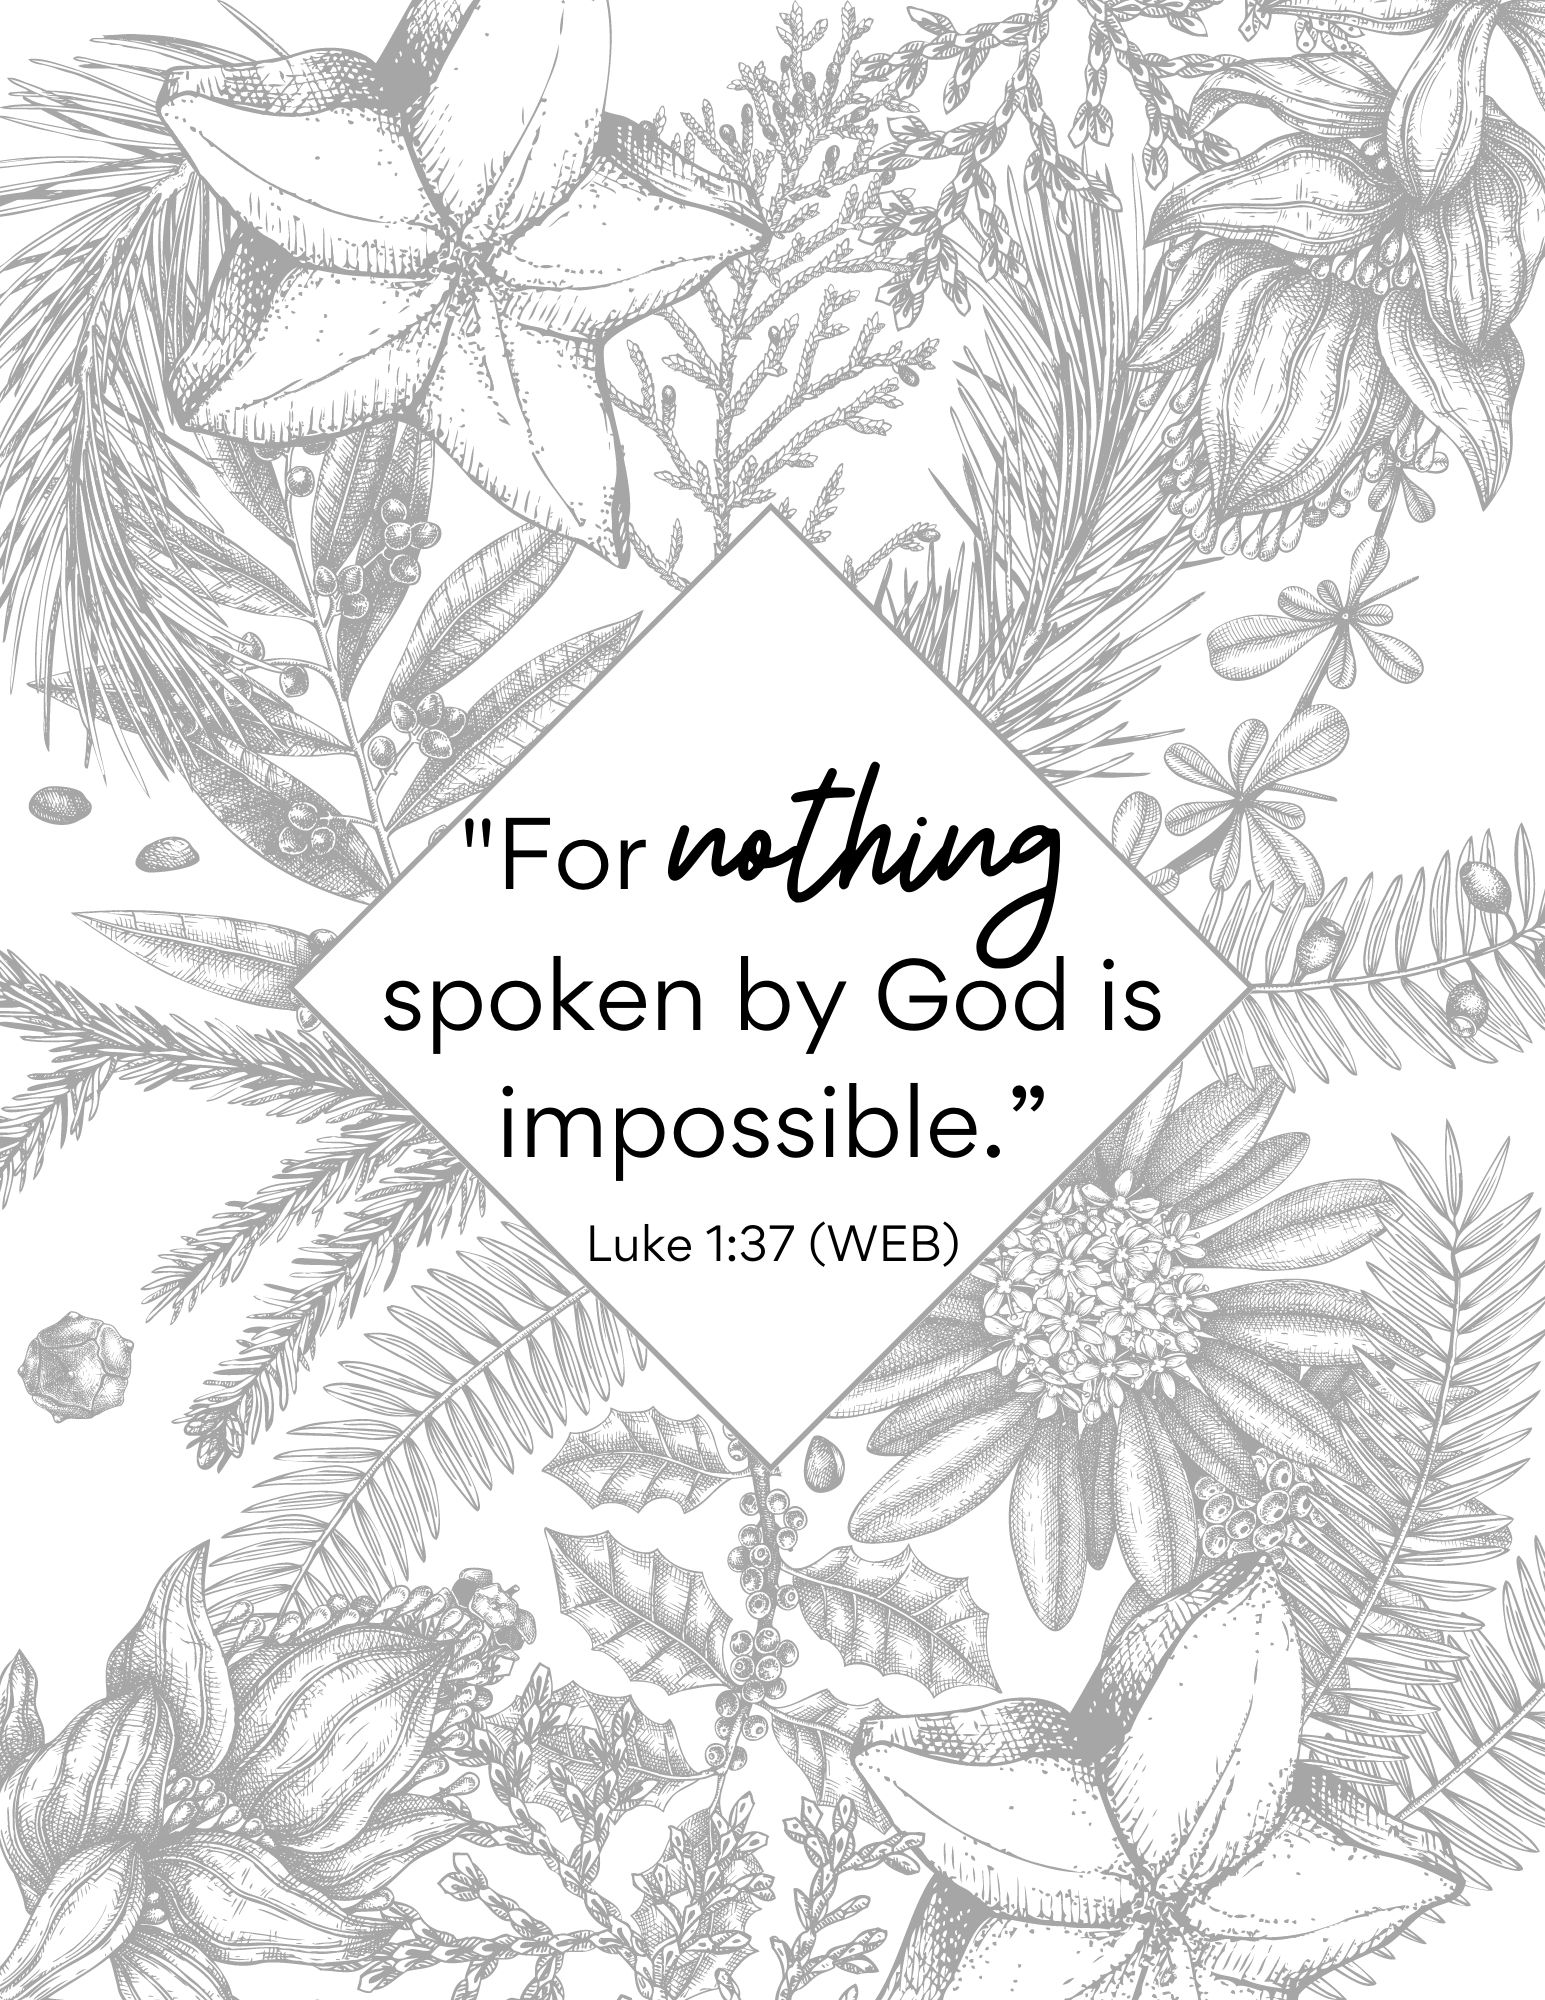 nothing is impossible with god coloring pages